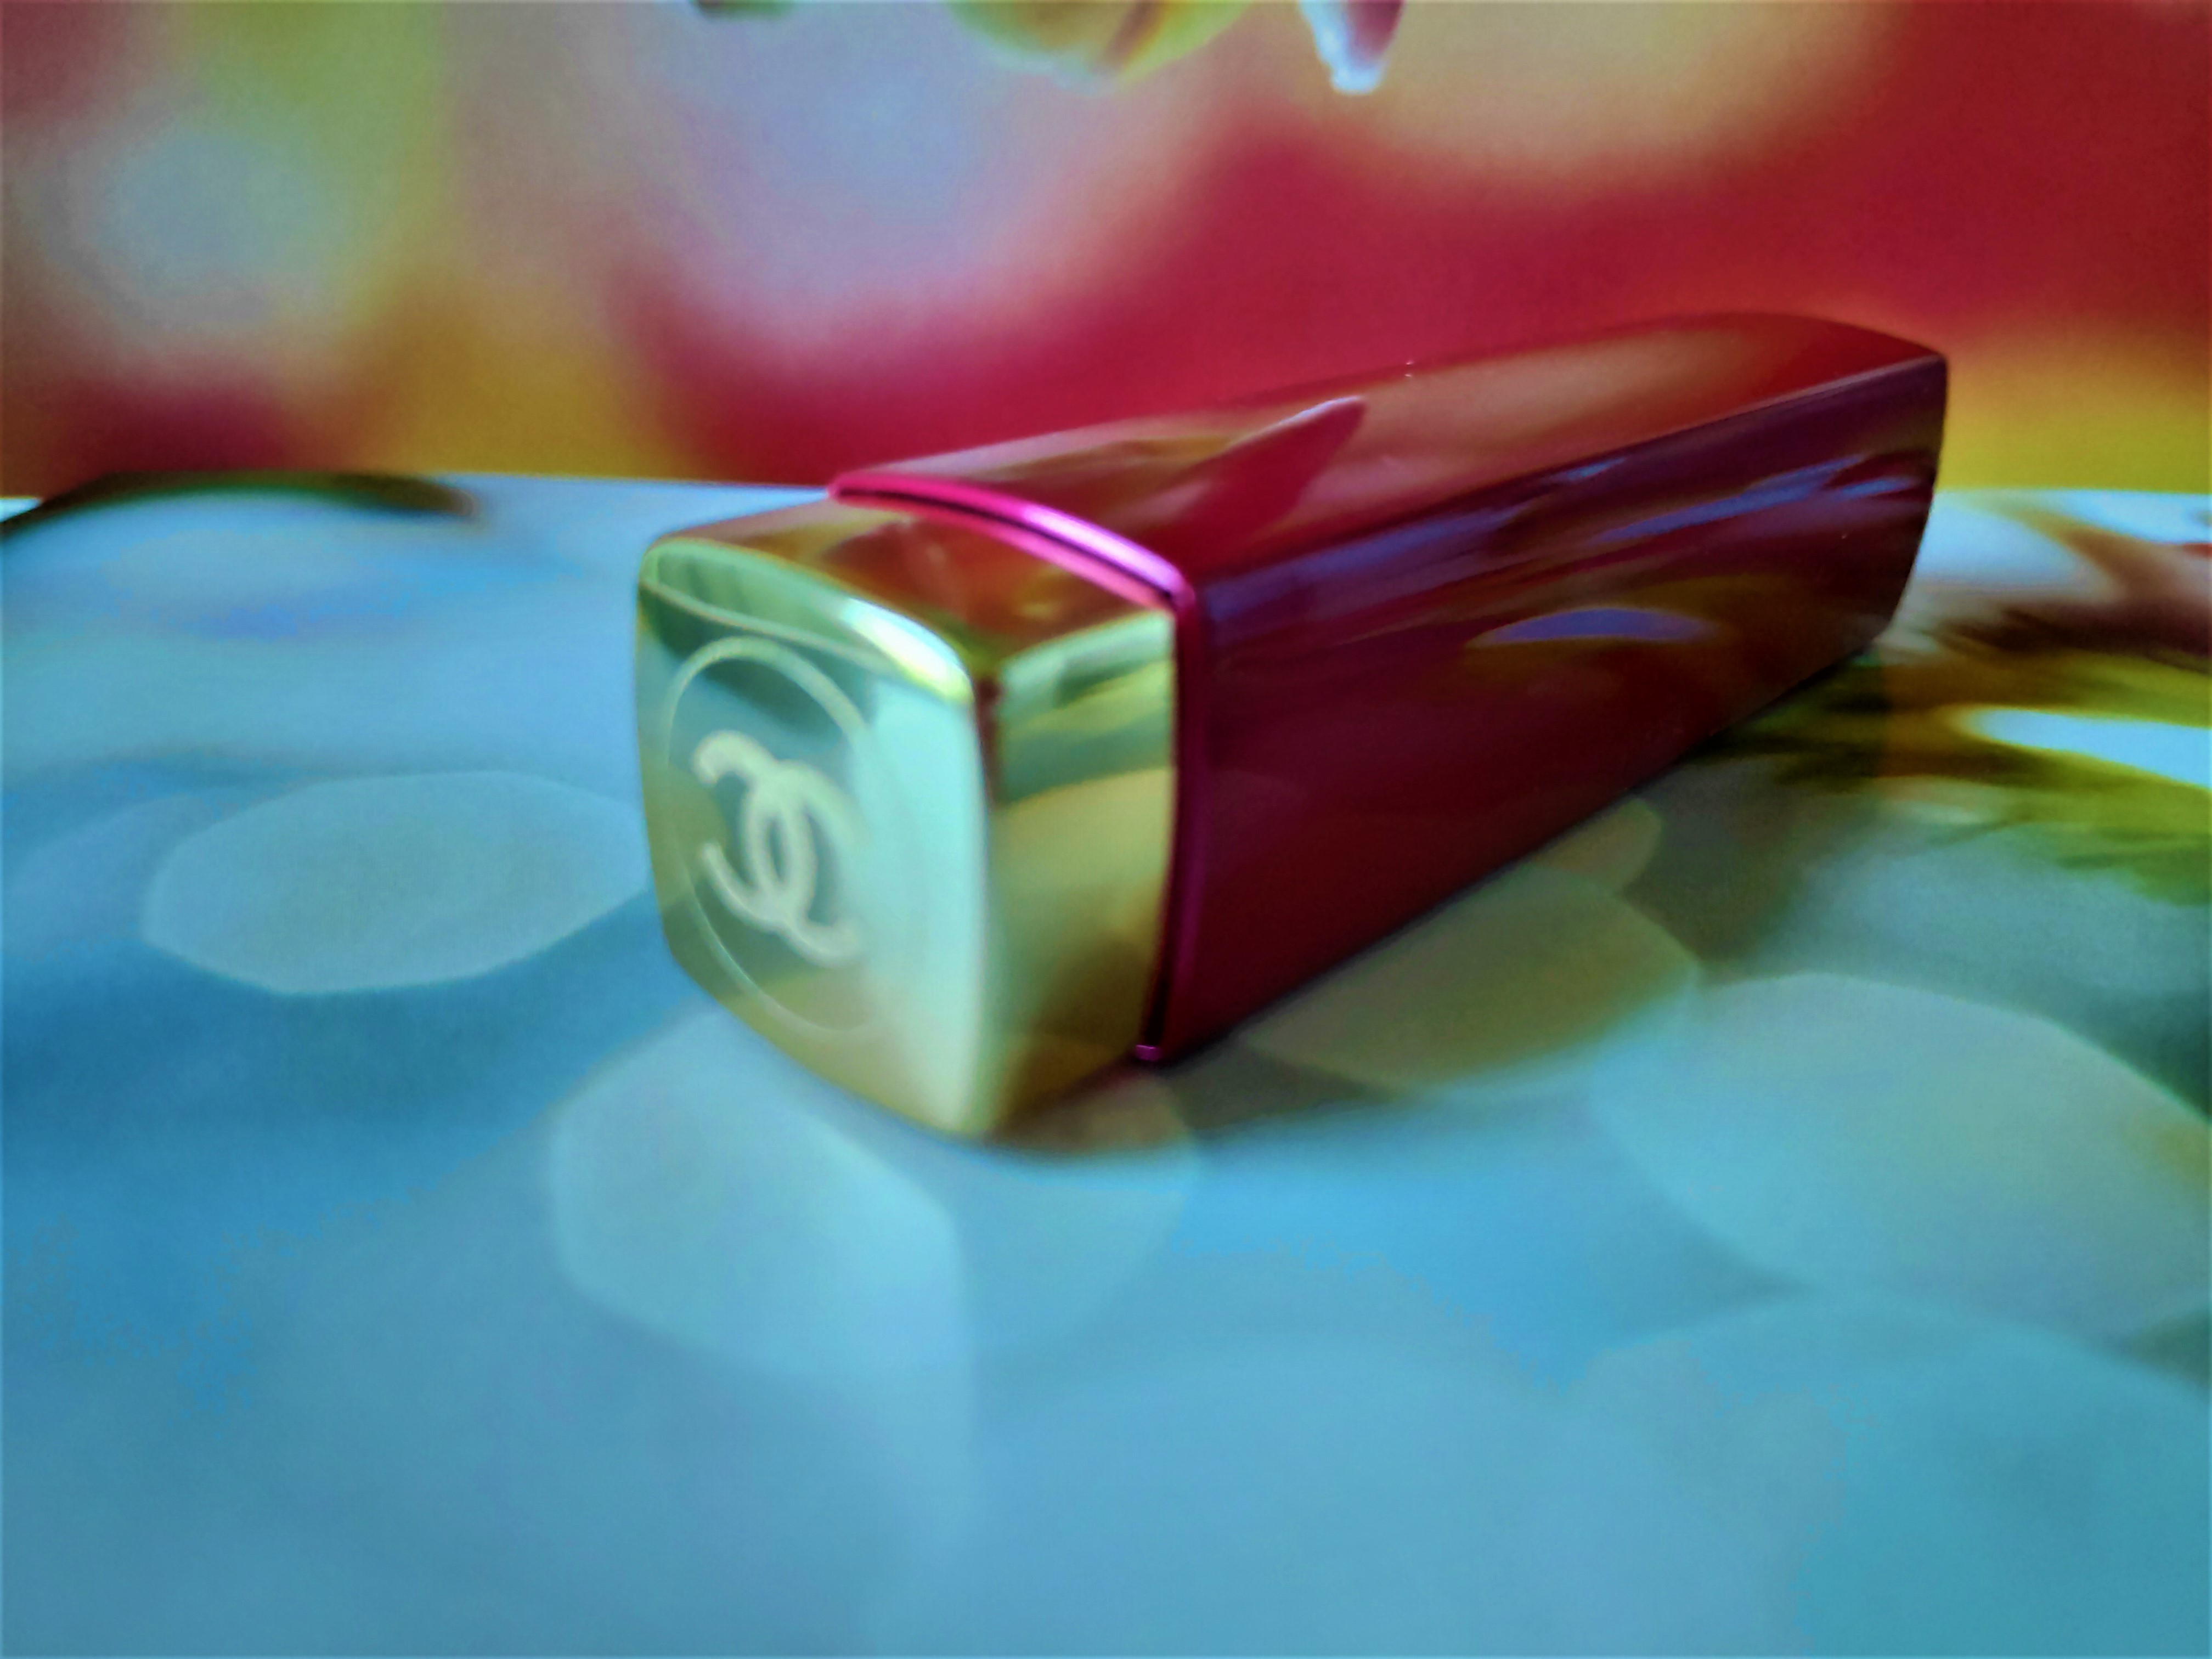 Chanel No.5 Rouge Allure Velvet lipstick Review - Glossnglitters